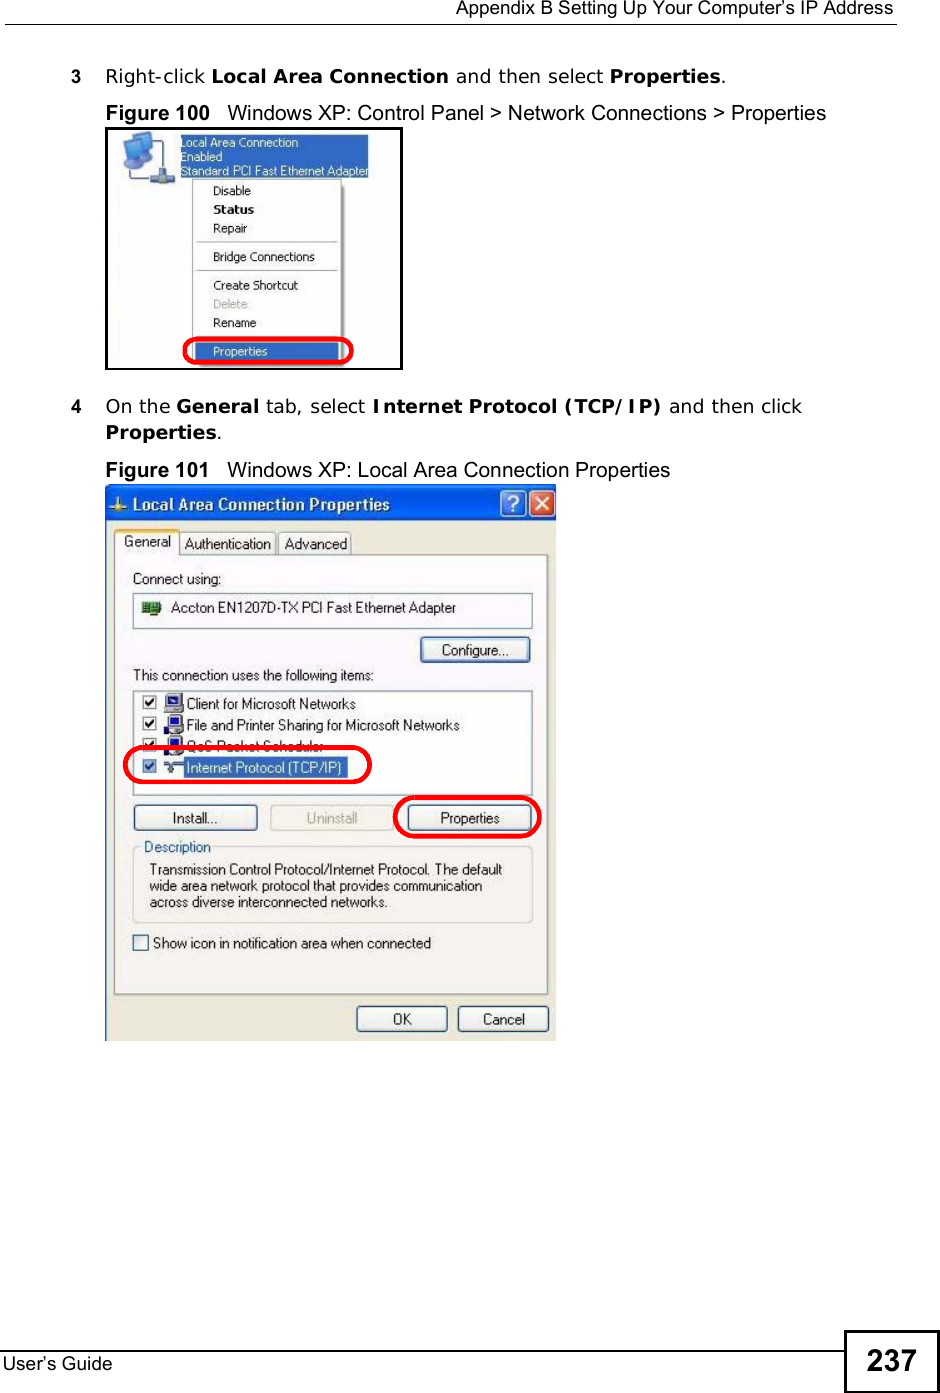  Appendix BSetting Up Your Computer s IP AddressUser s Guide 2373Right-click Local Area Connection and then select Properties.Figure 100   Windows XP: Control Panel &gt; Network Connections &gt; Properties4On the General tab, select Internet Protocol (TCP/IP) and then click Properties.Figure 101   Windows XP: Local Area Connection Properties